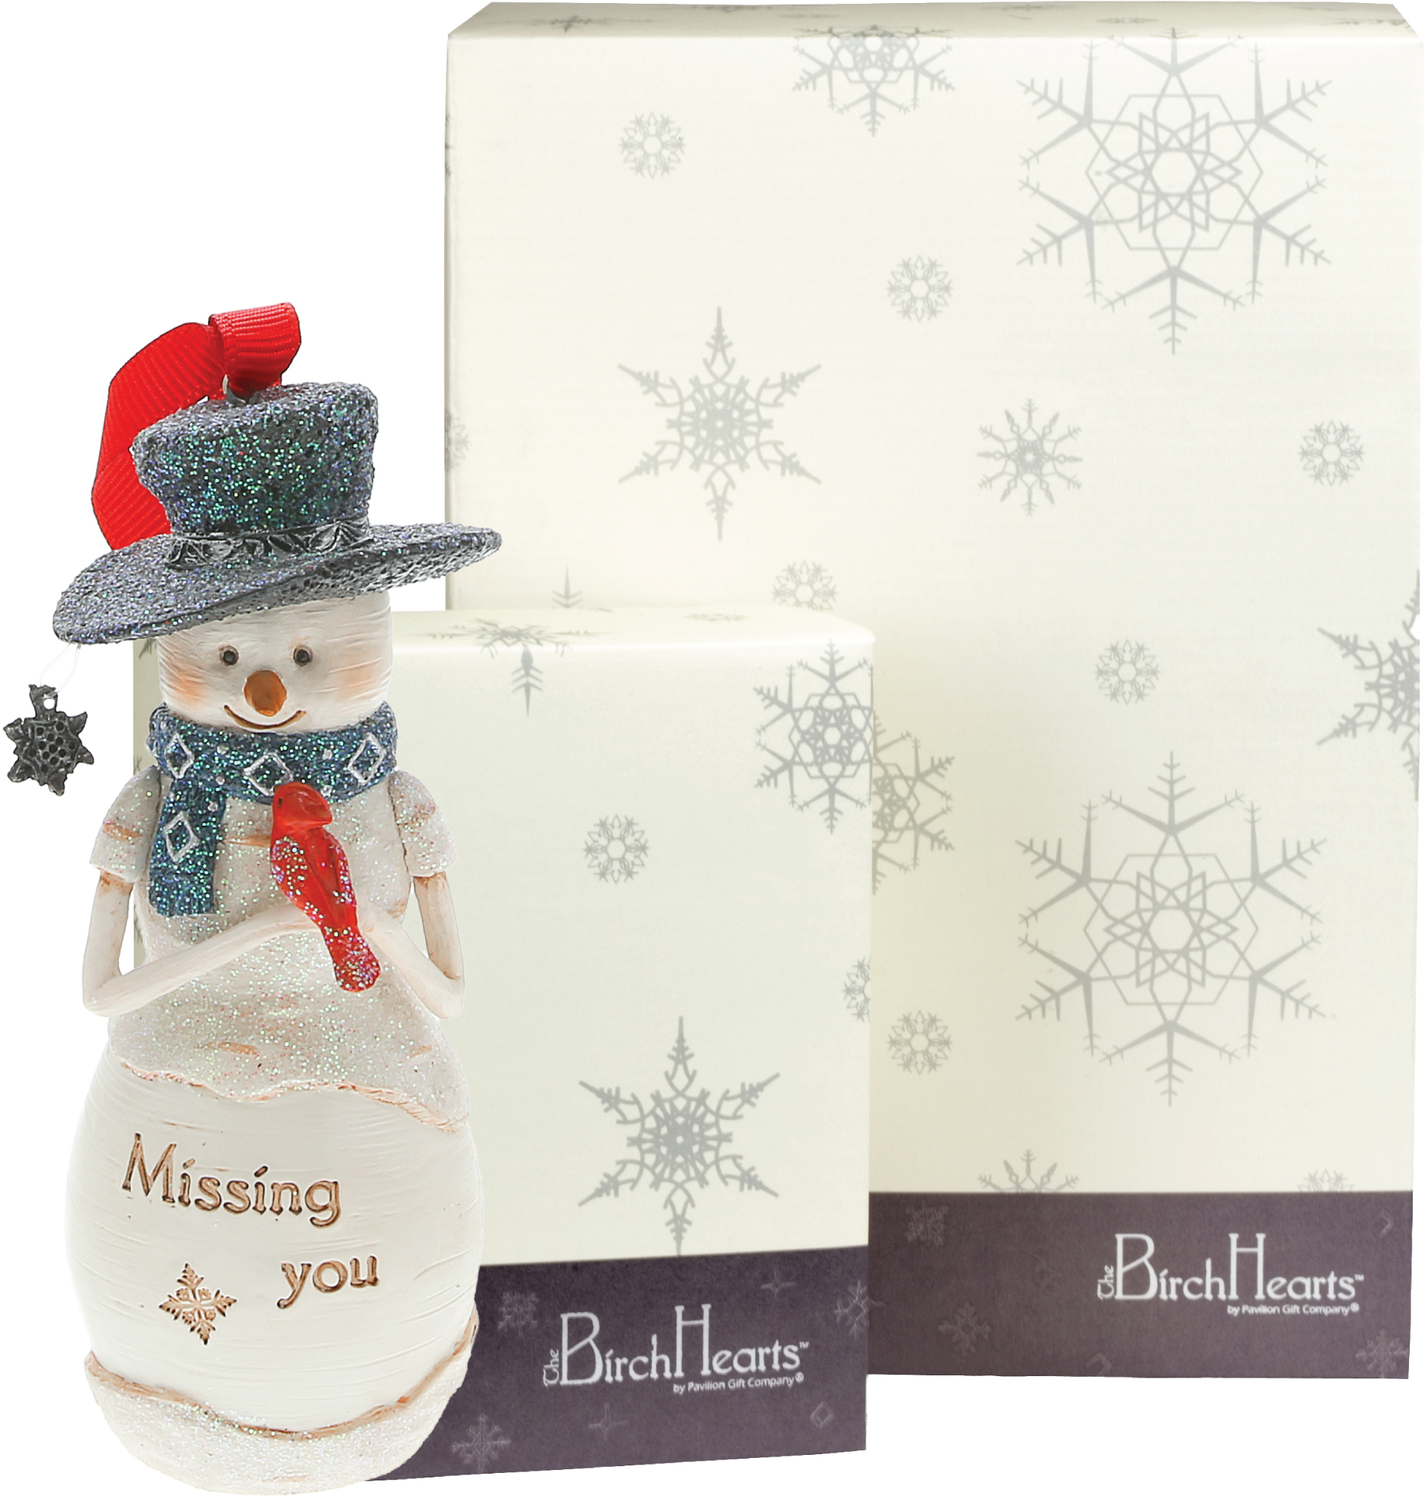 Missing You by The Birchhearts - Missing You - 4" Snowman Ornament